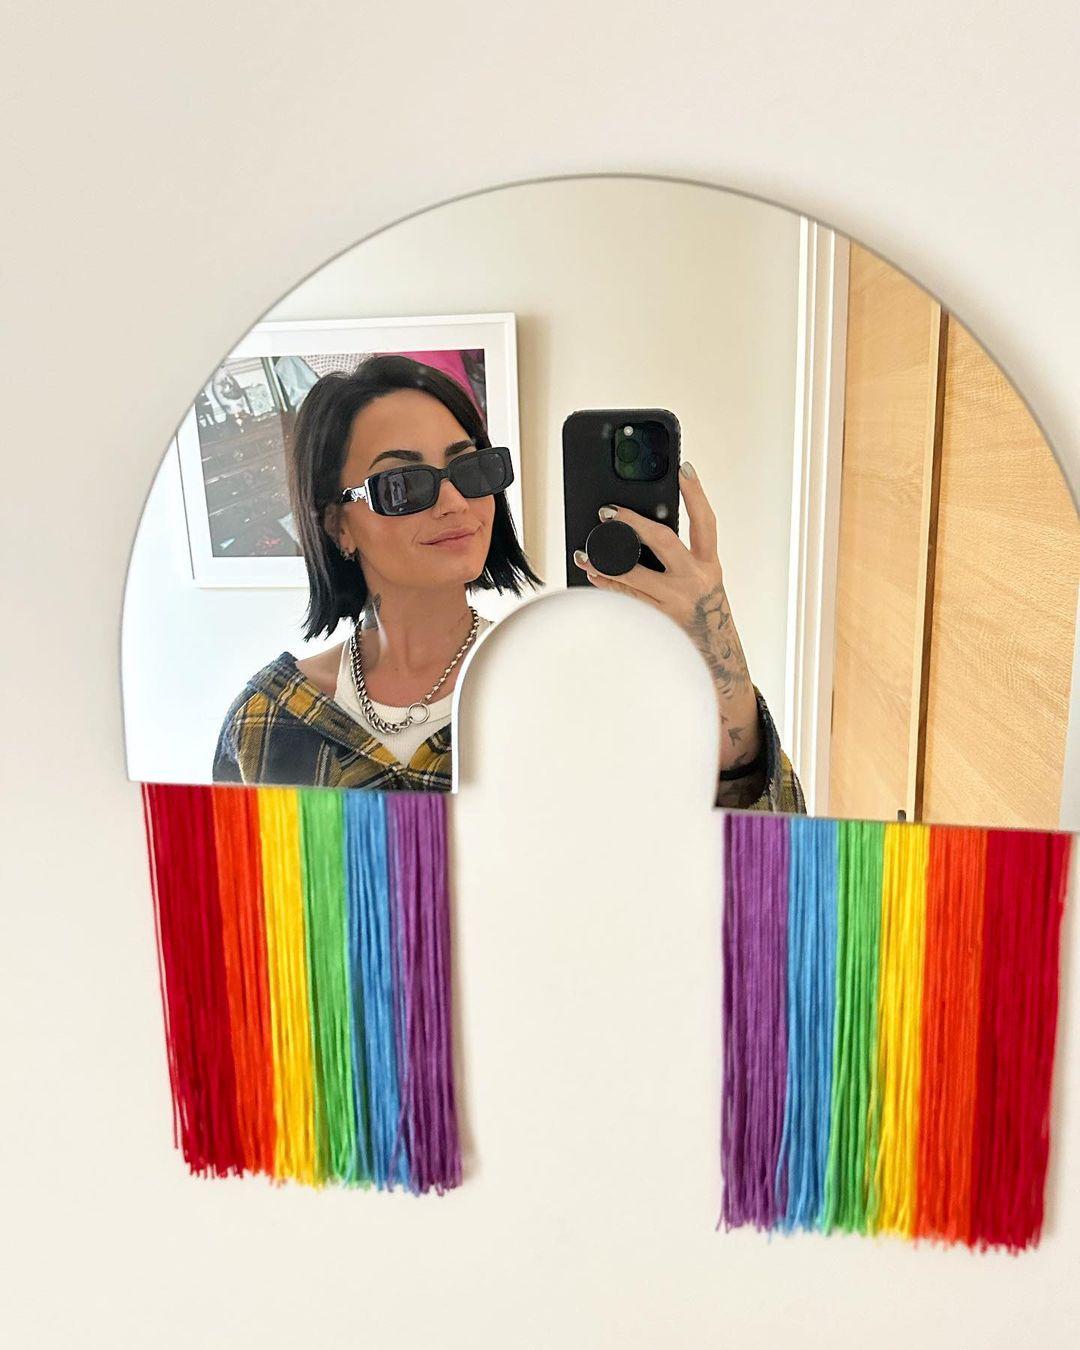 Demi Lovato Reveals REAL Reason Why Re-Adopted 'She/Her' Pronouns After Previously Using 'They/Them'